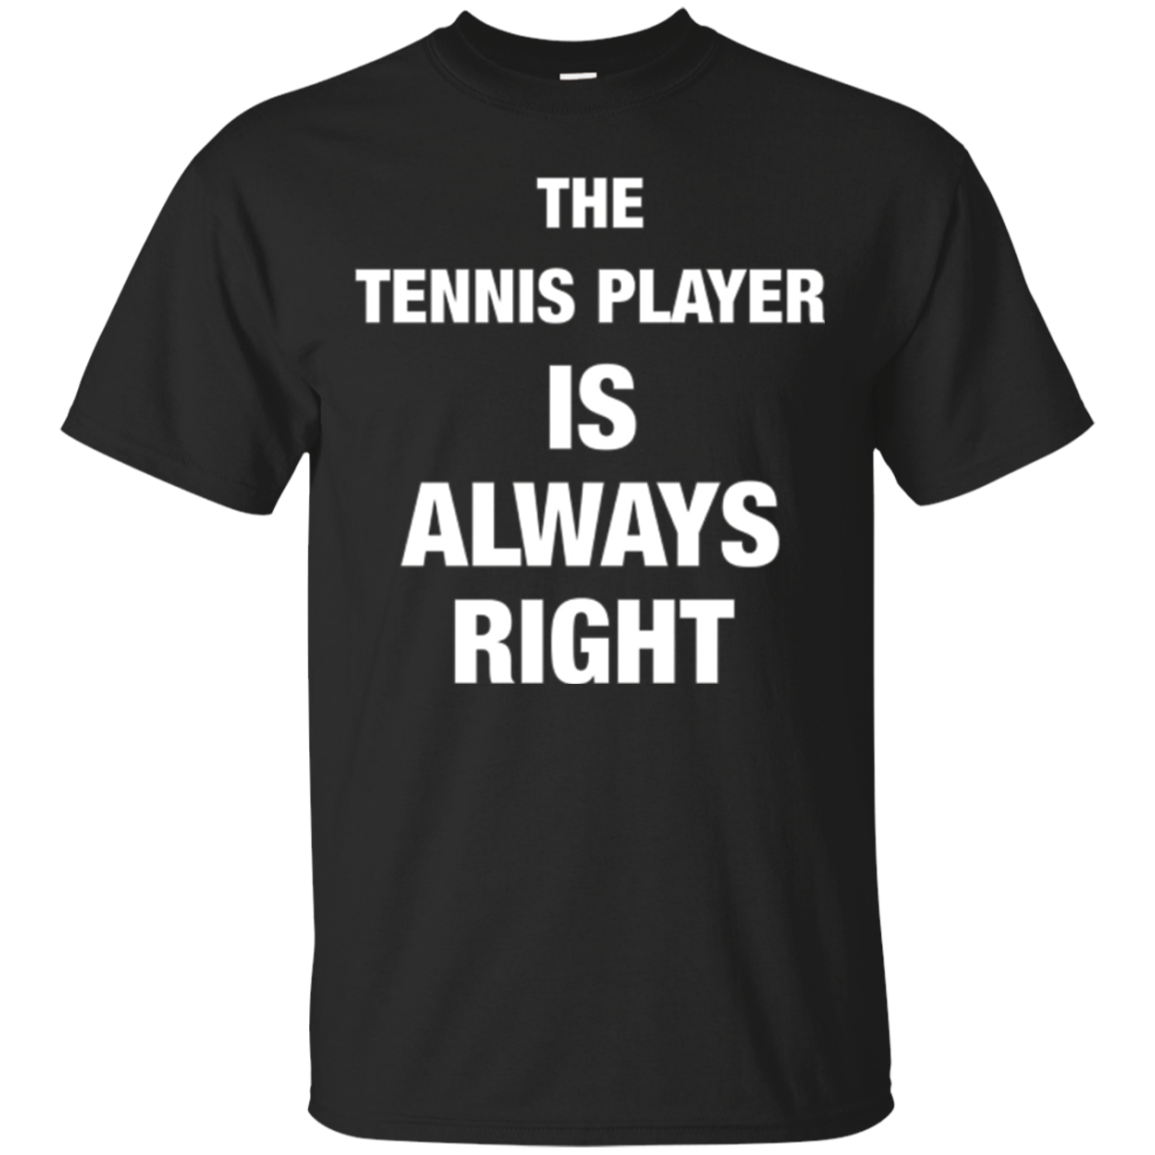 The Tennis Player Is Always Right Funny Shirt